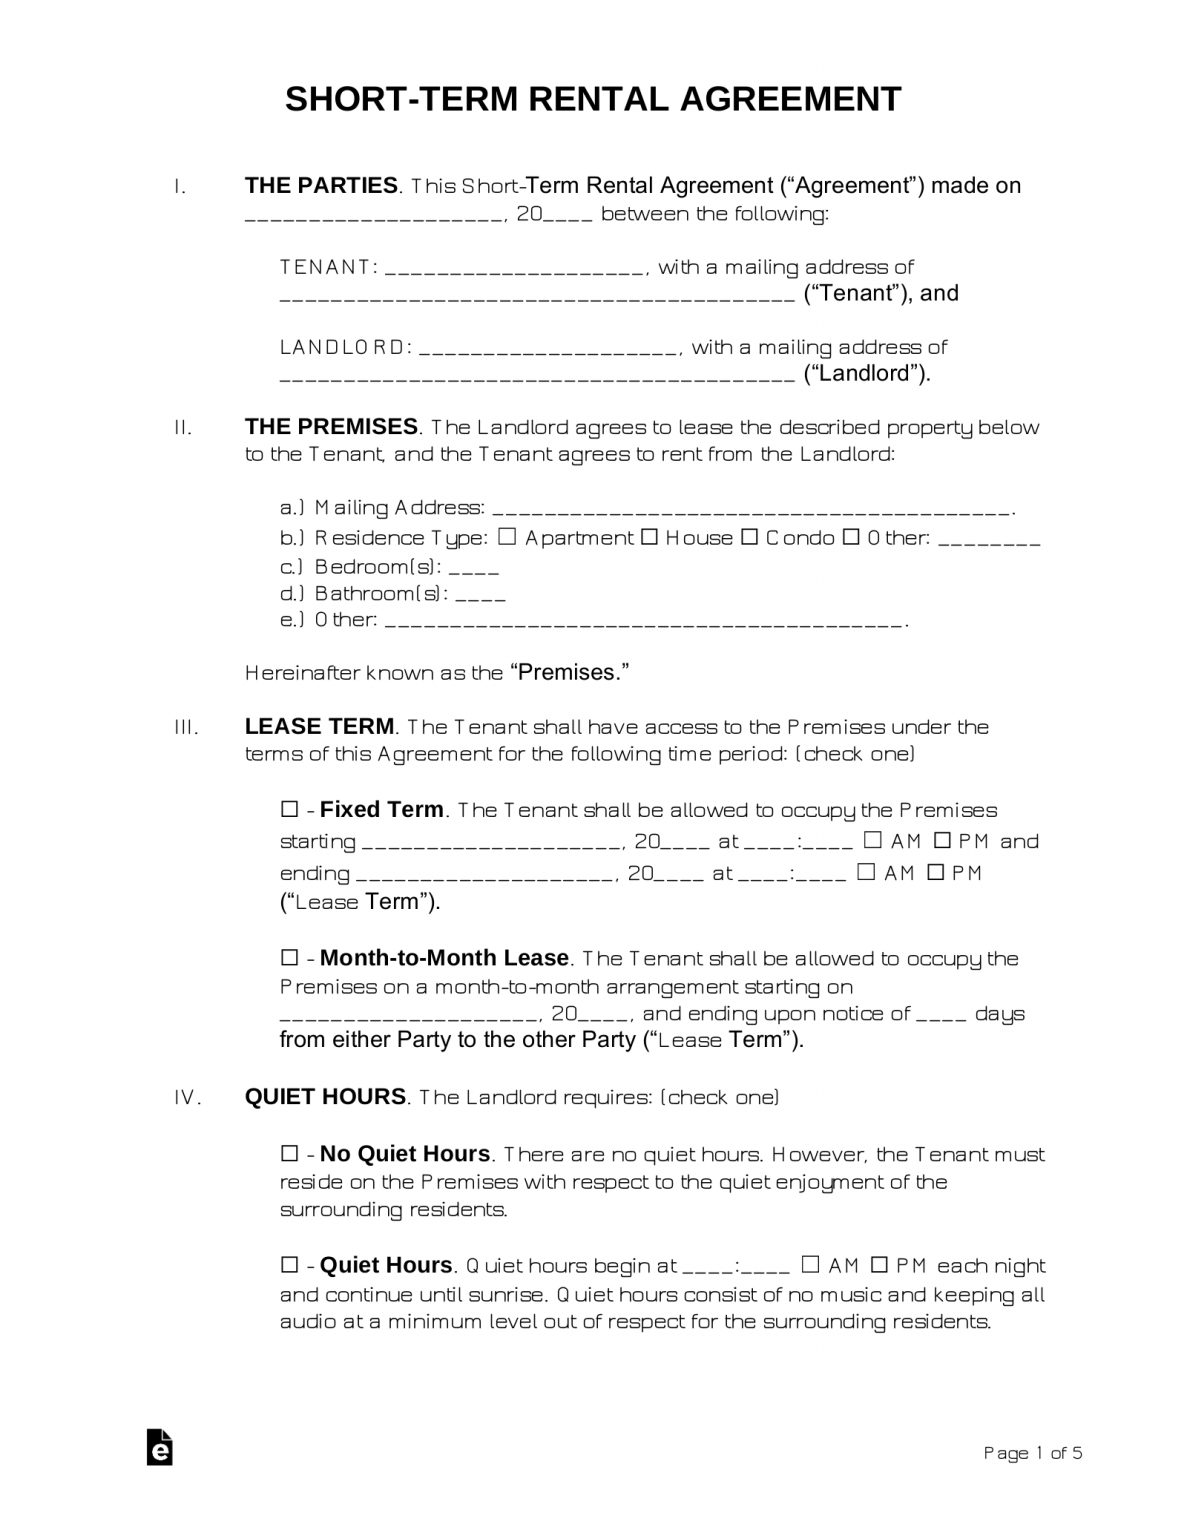 maryland-lease-agreement-free-2021-official-pdf-word